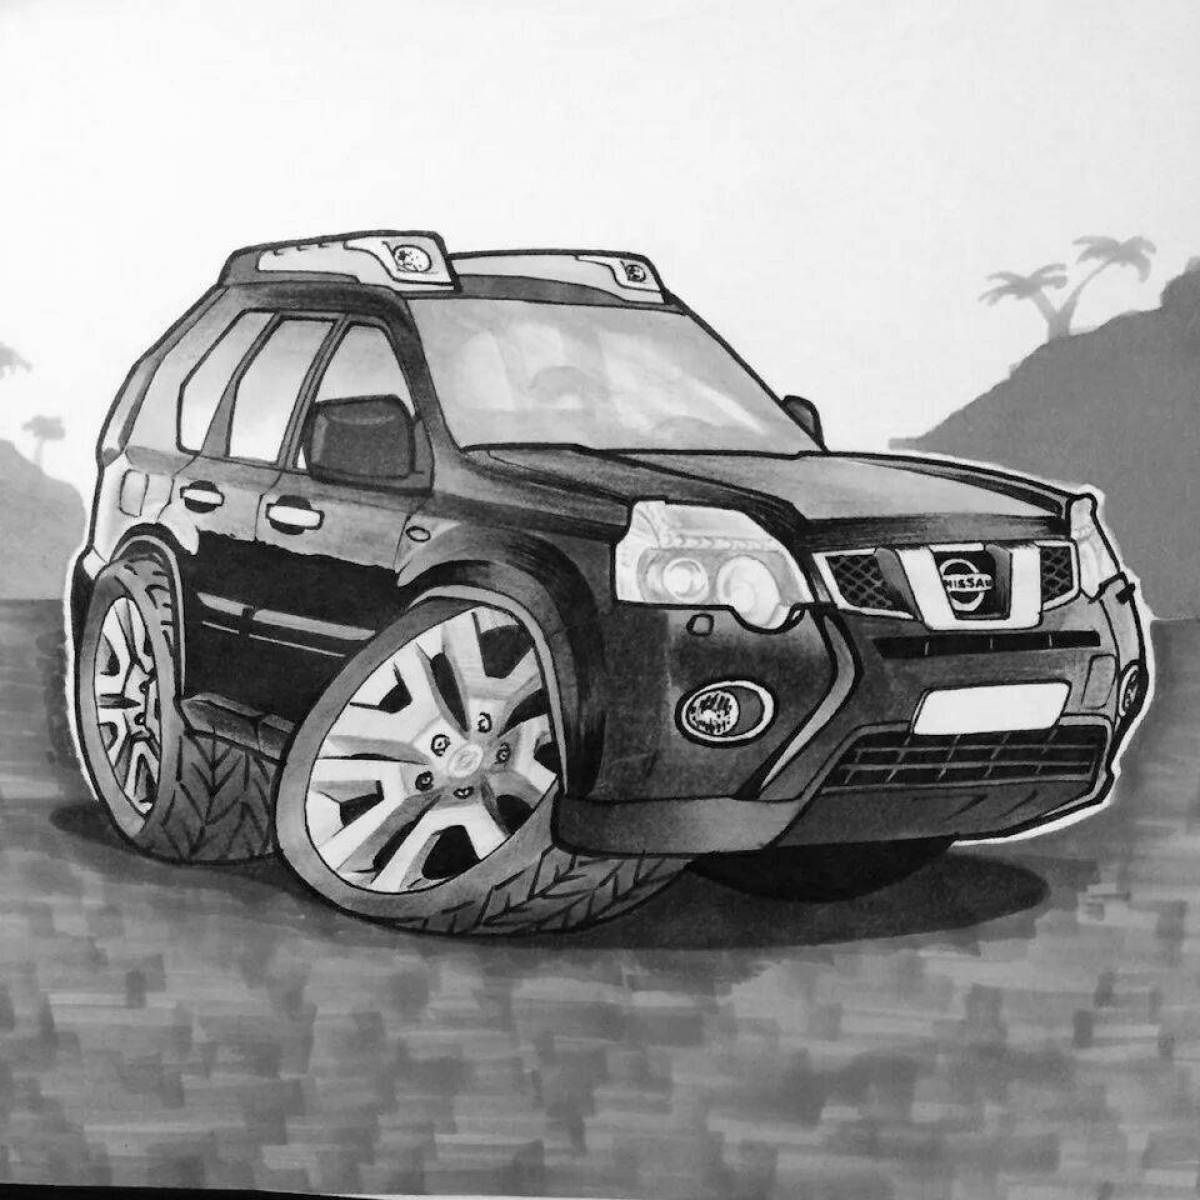 Nissan x trail incredible coloring book